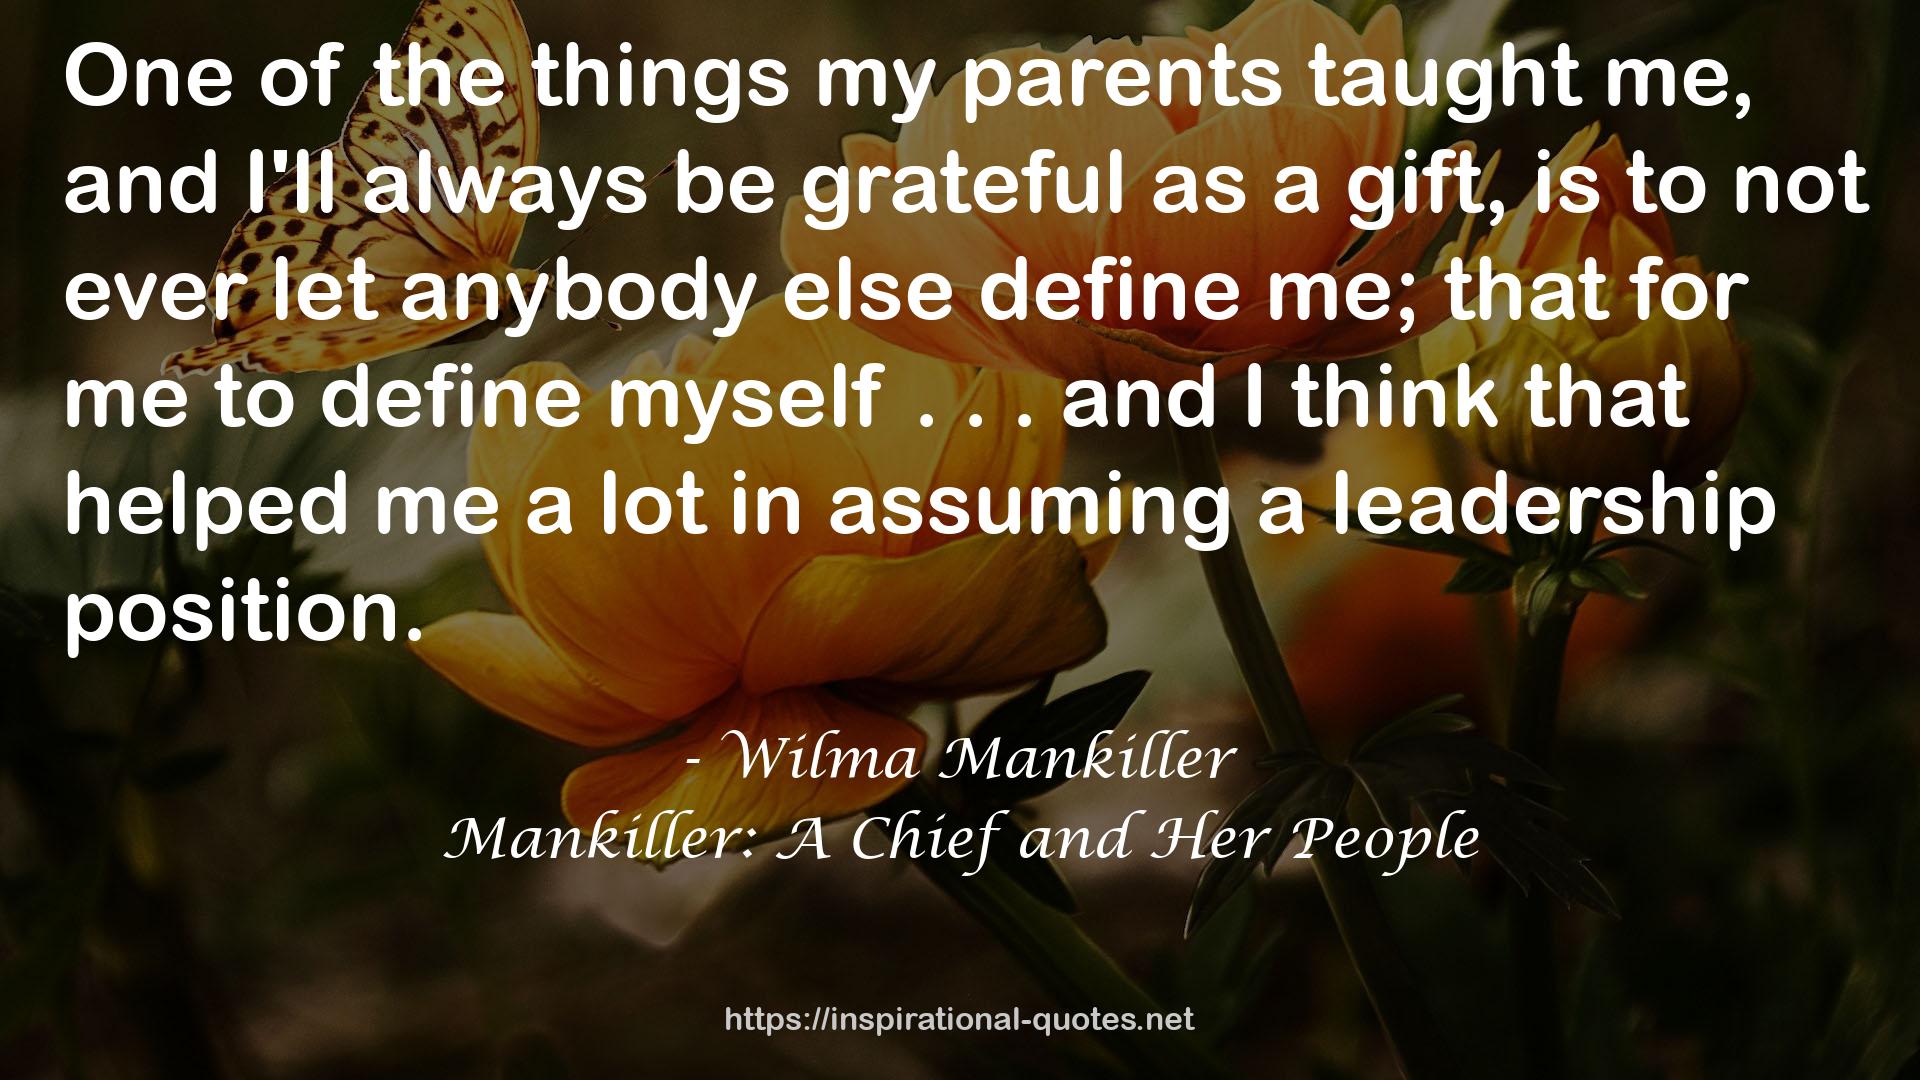 Mankiller: A Chief and Her People QUOTES